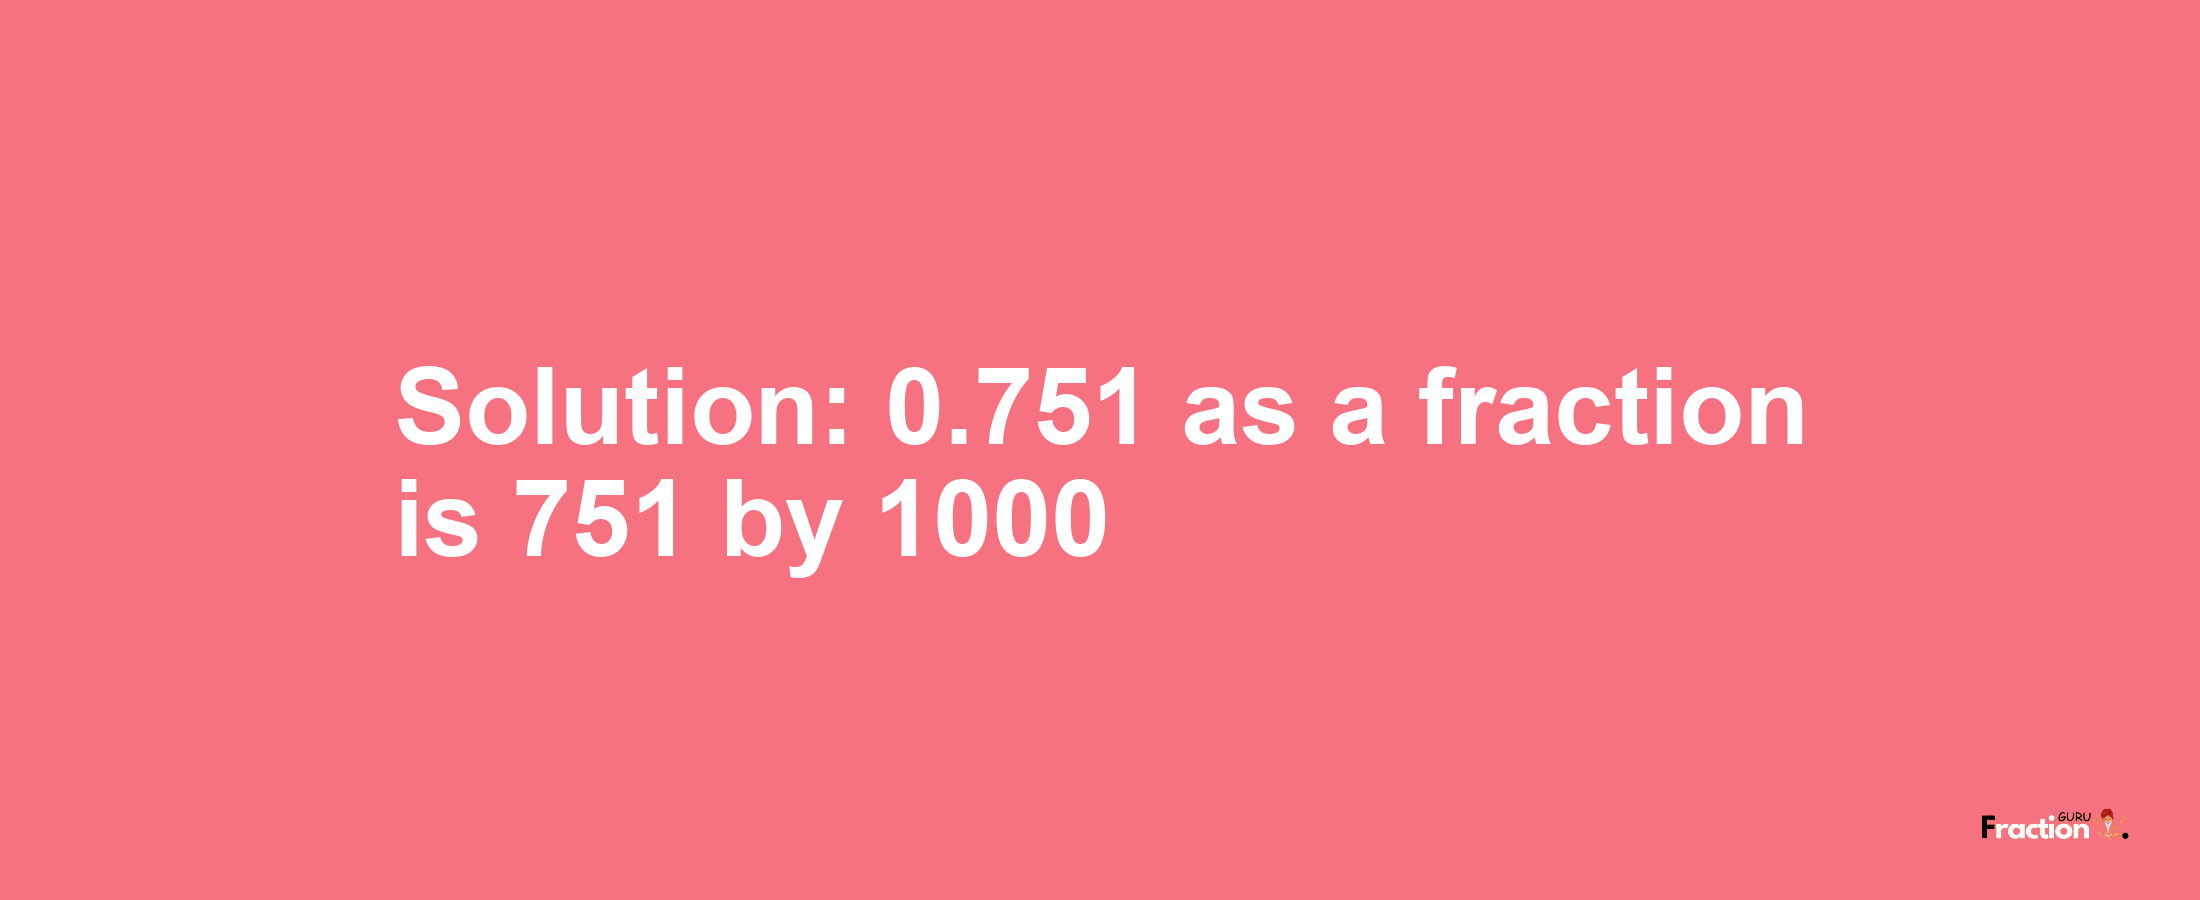 Solution:0.751 as a fraction is 751/1000